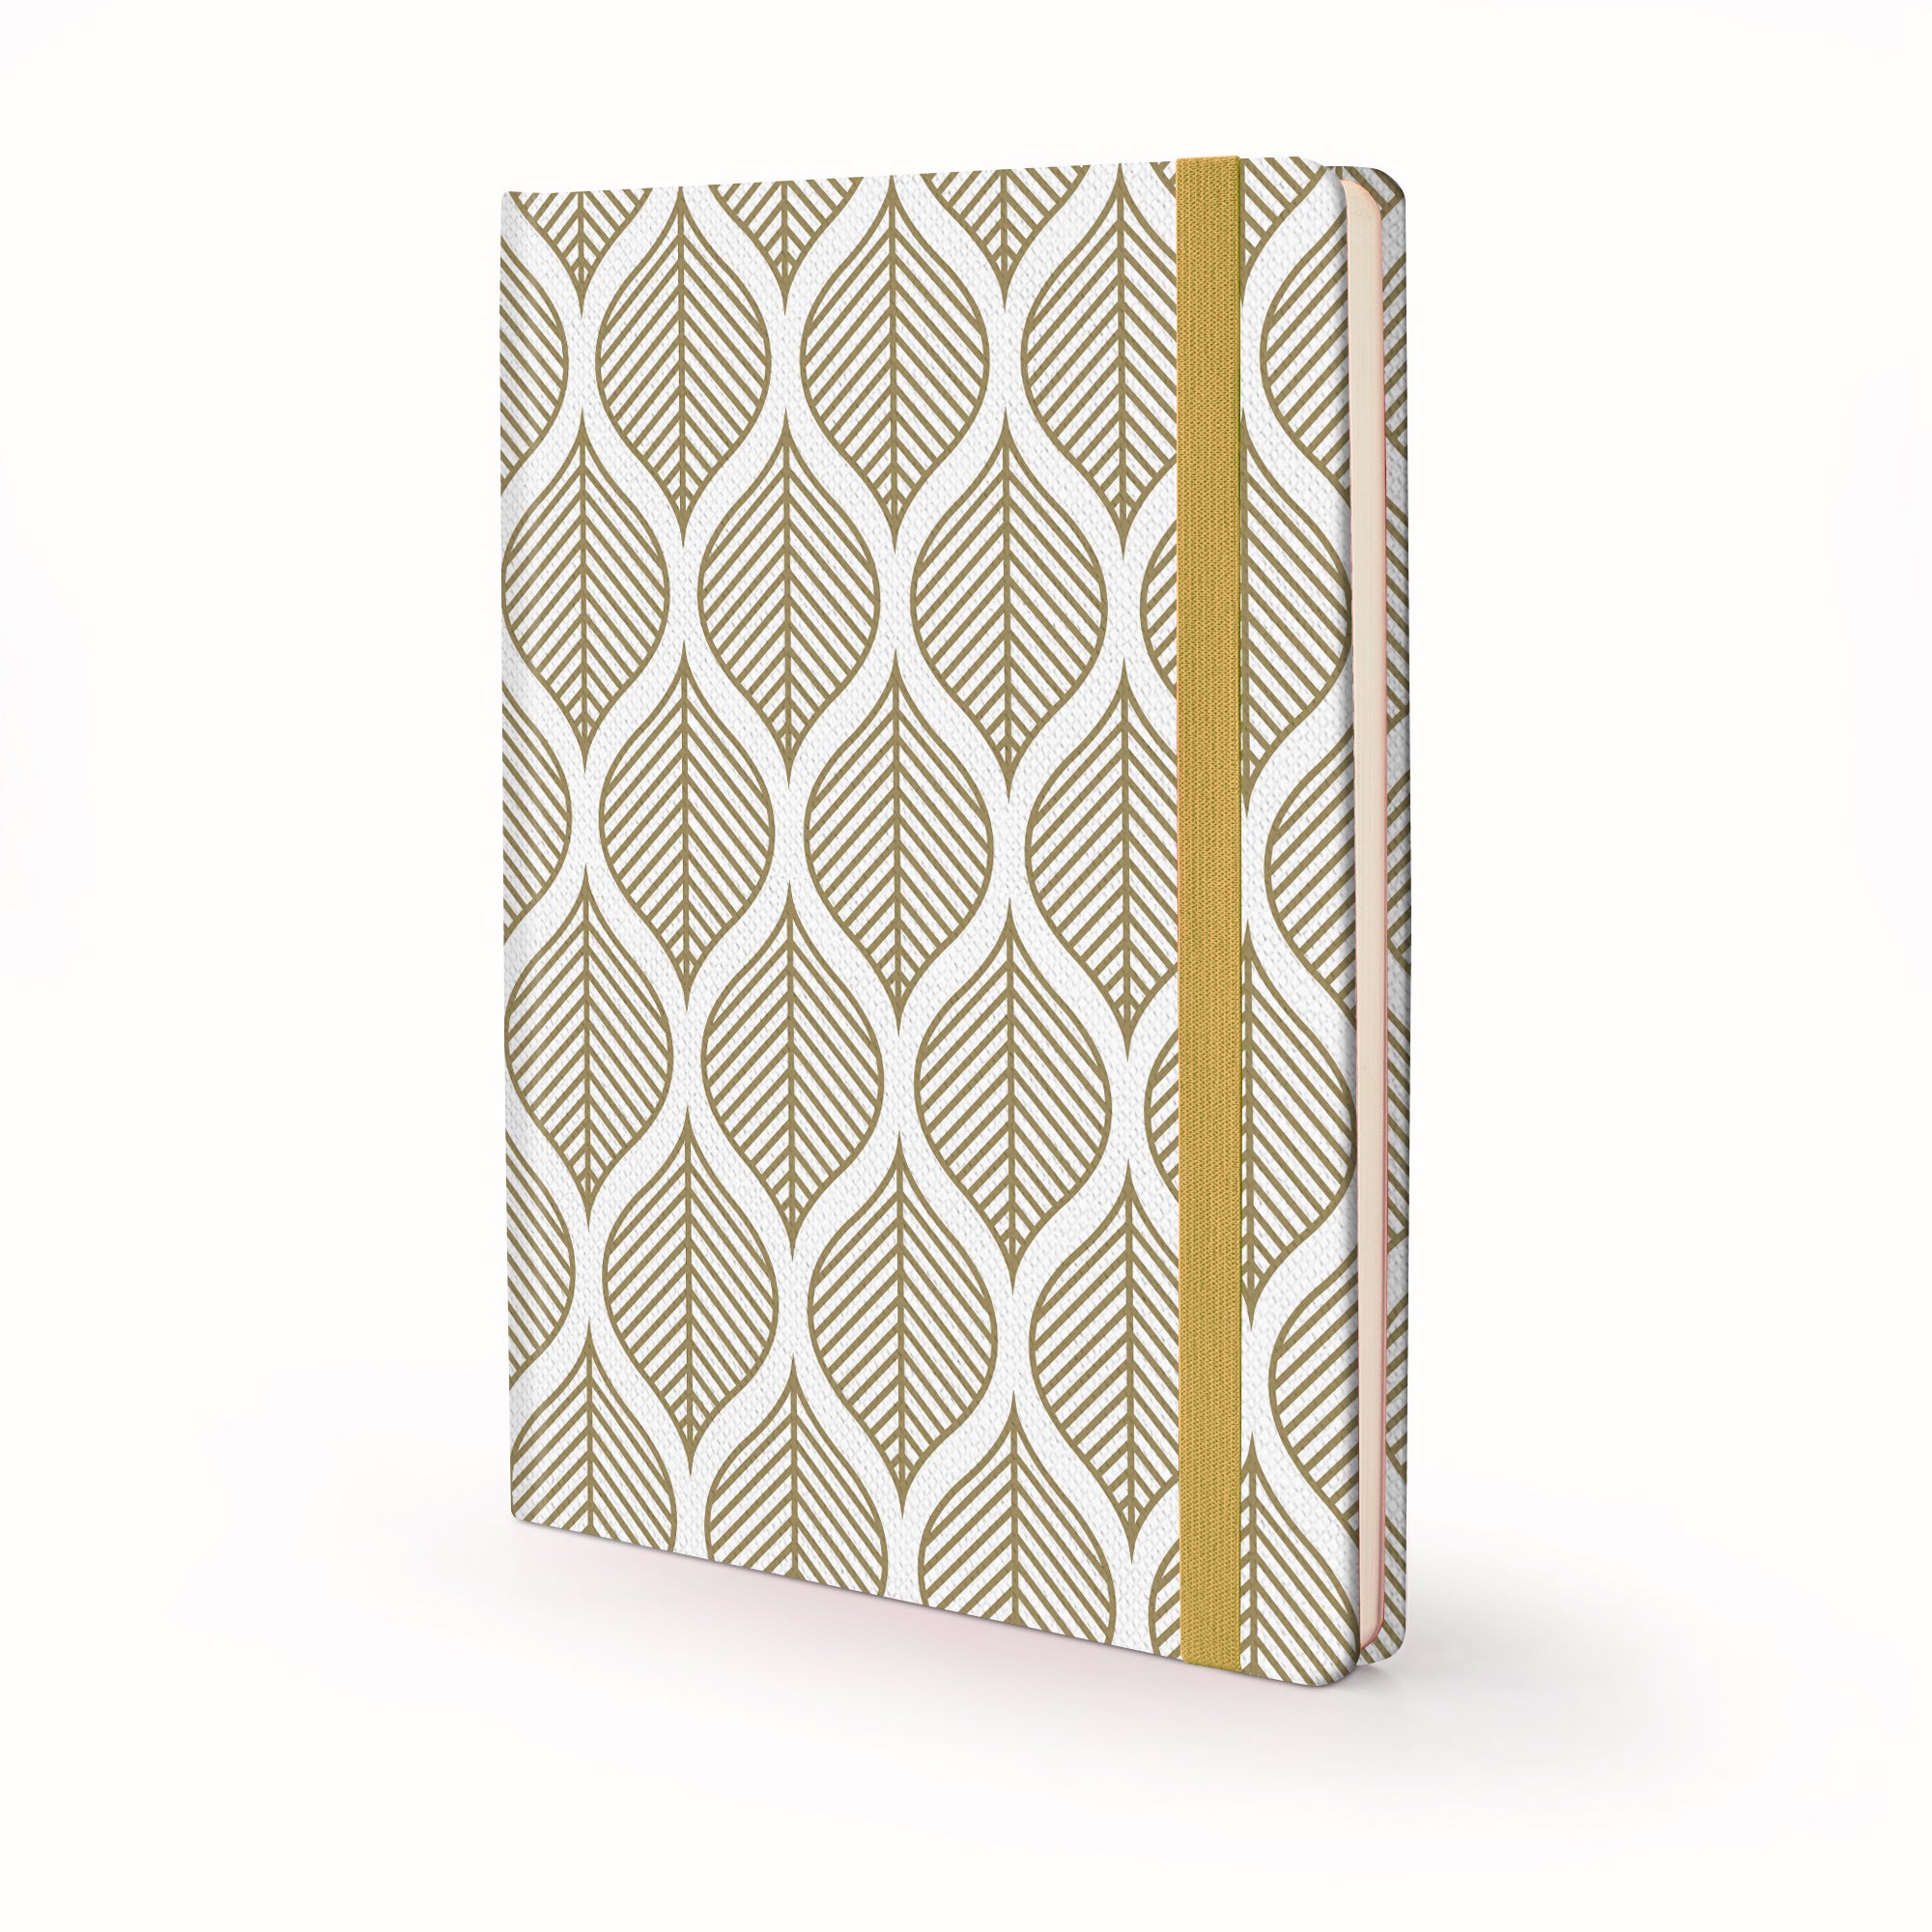 Image shows a Nature Geometric Gold Leaves journal